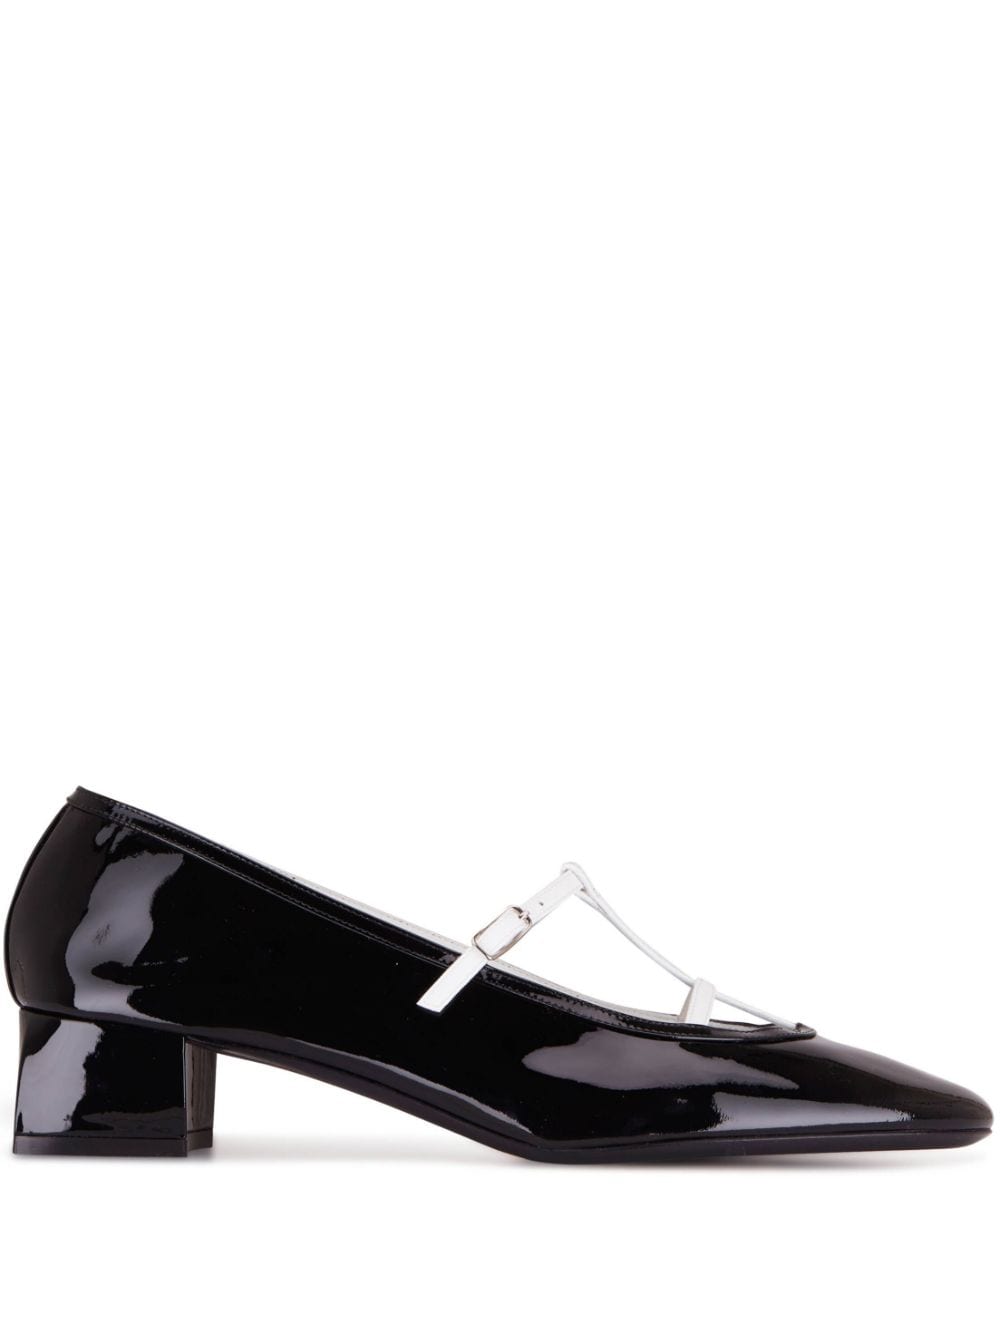 Khaite Fawn Bicolor Leather Pumps In Blackoff White